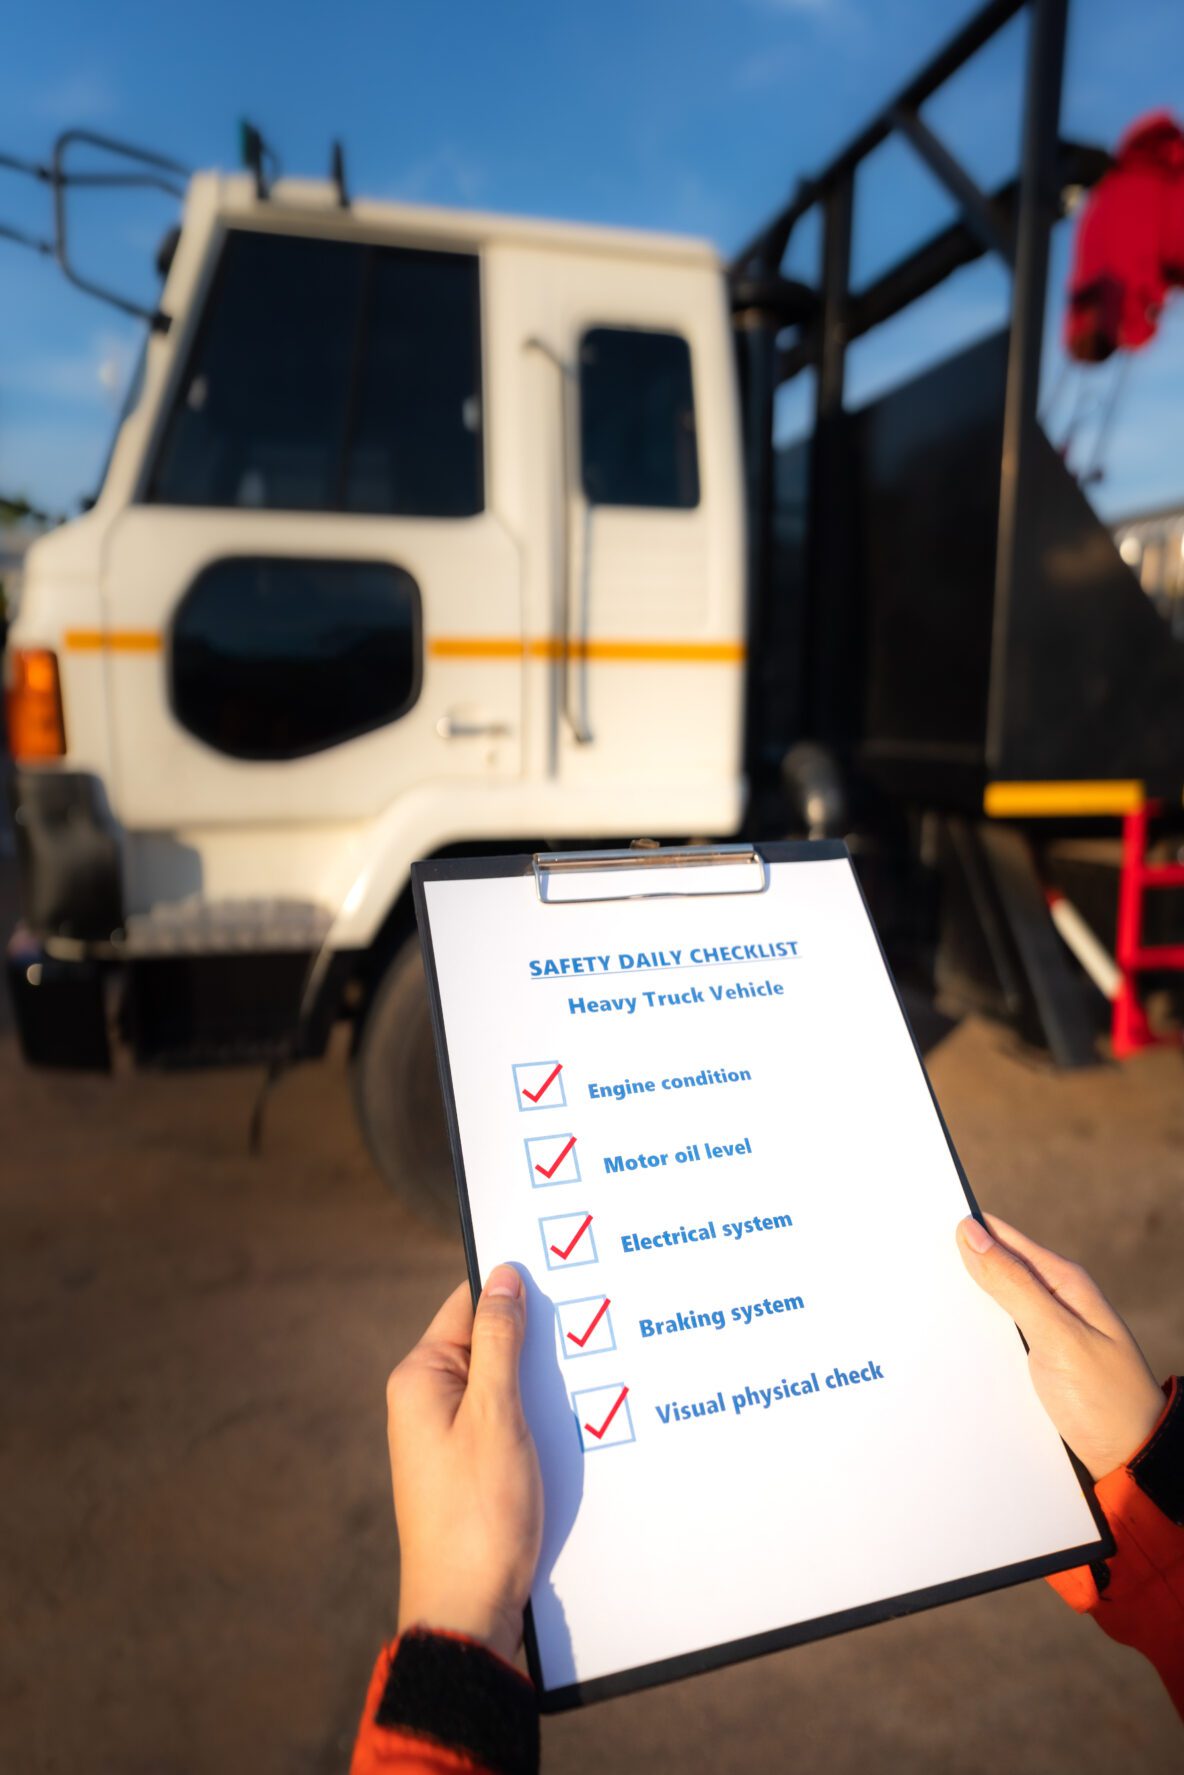 mechanic worker is using the daily checklist form to verify and inspection a heavy truck